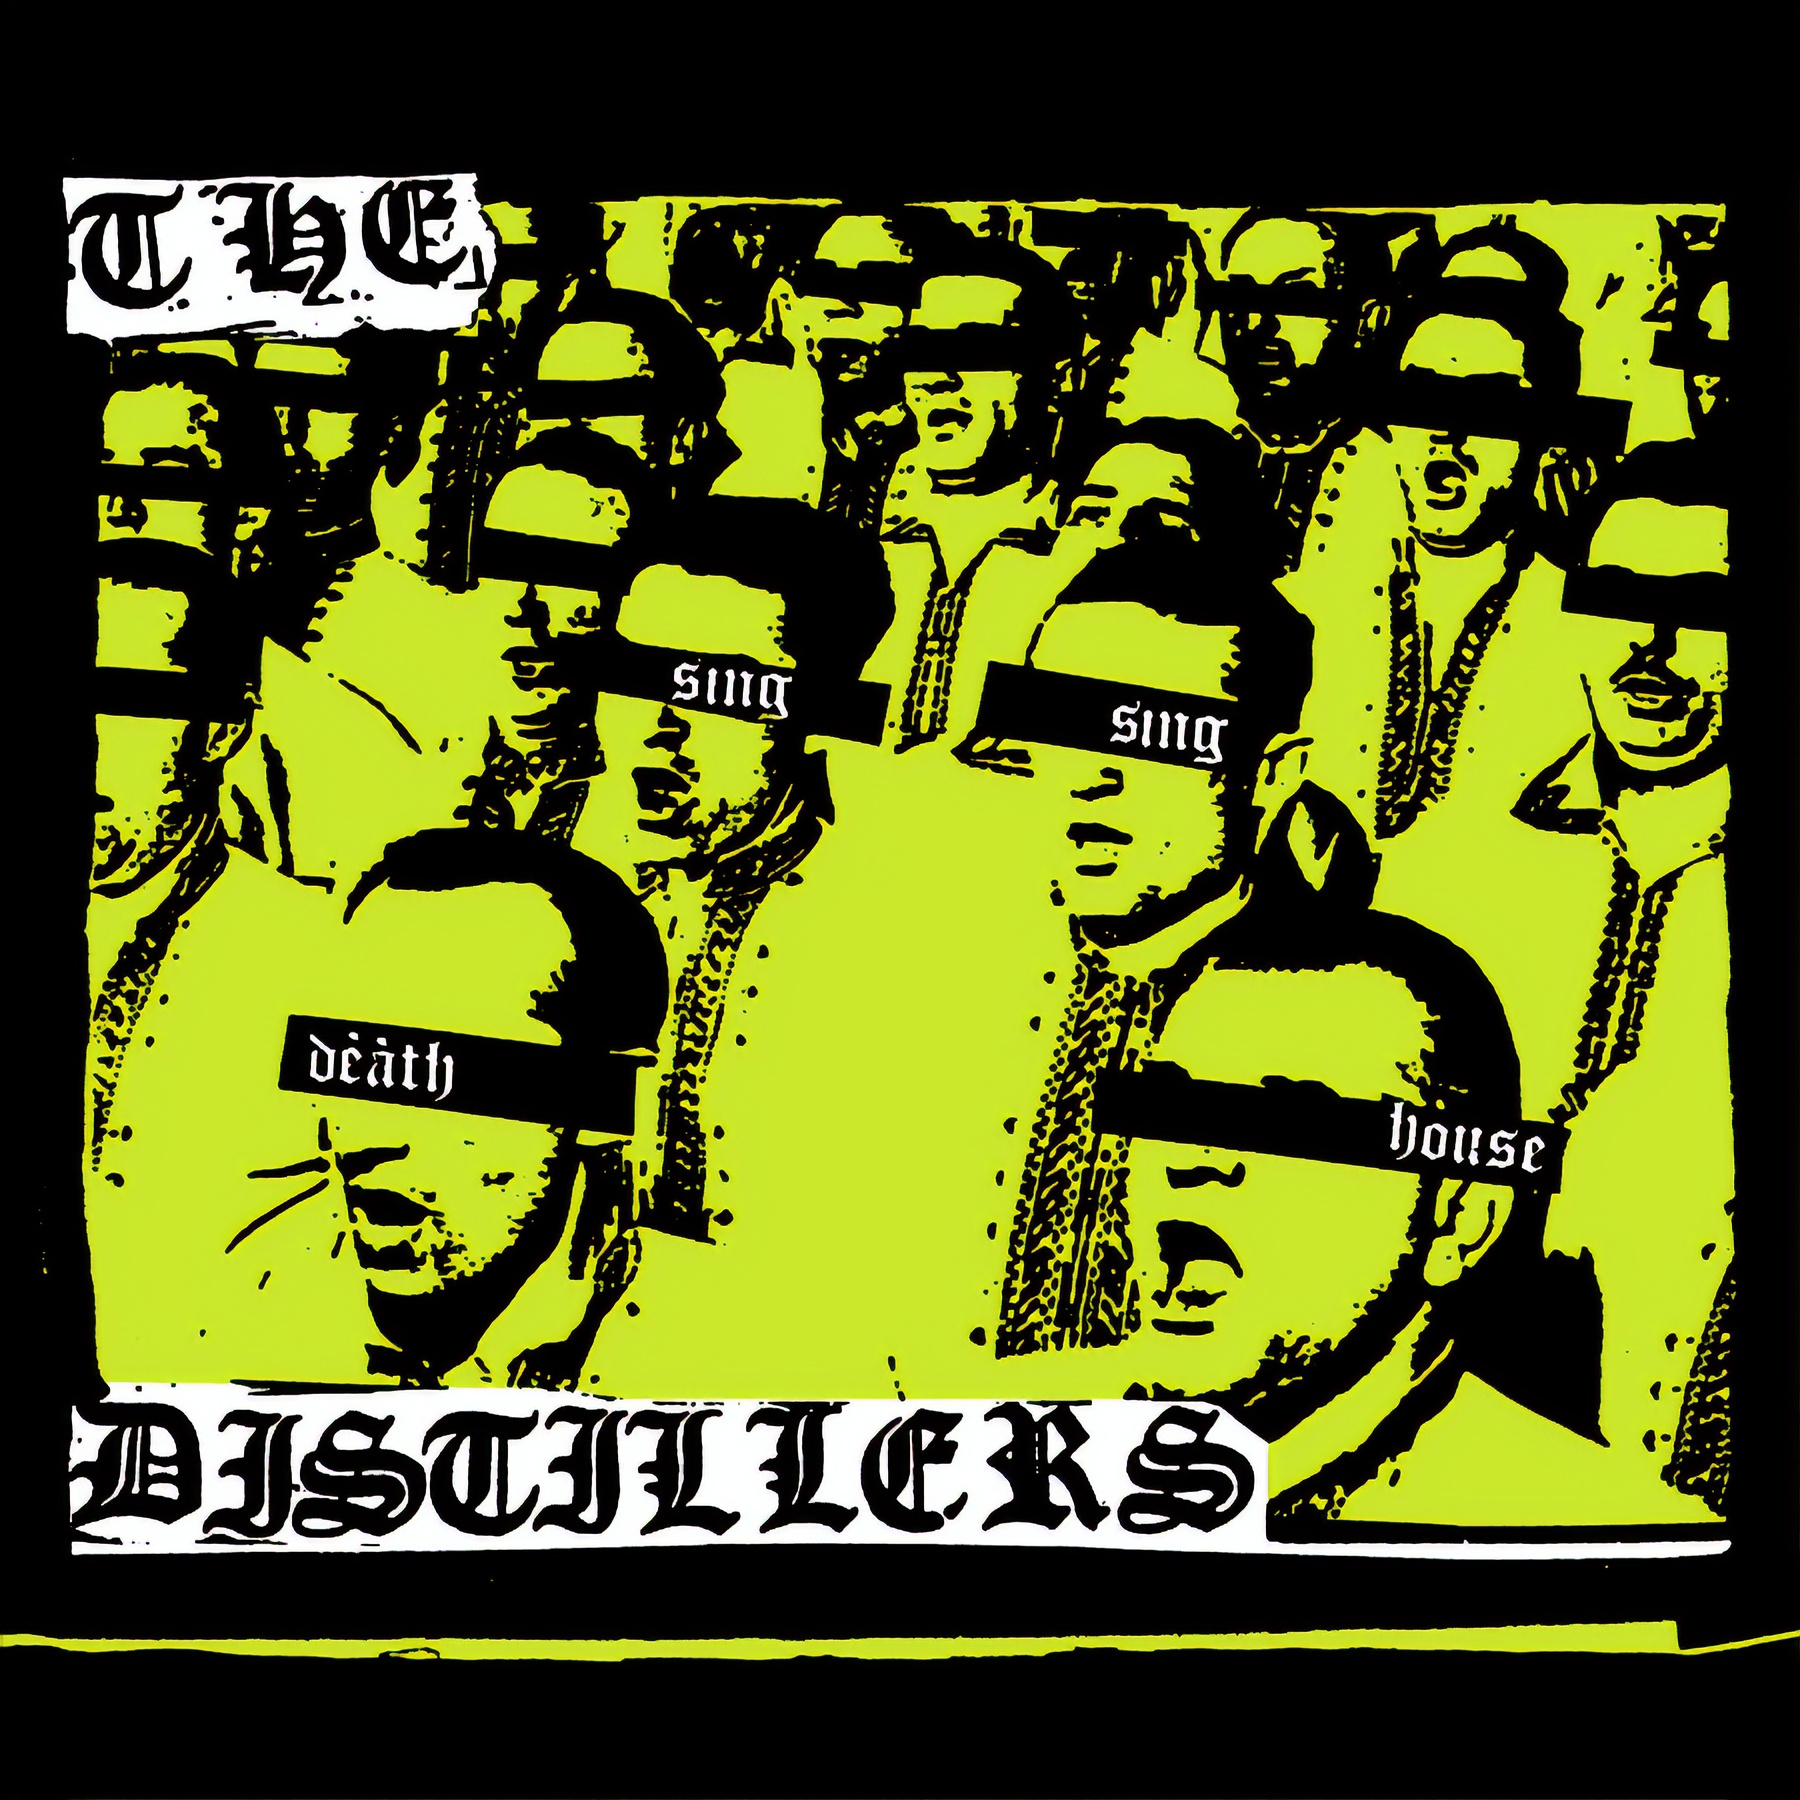 The Distillers - Sing Sing Death House (neon yellow